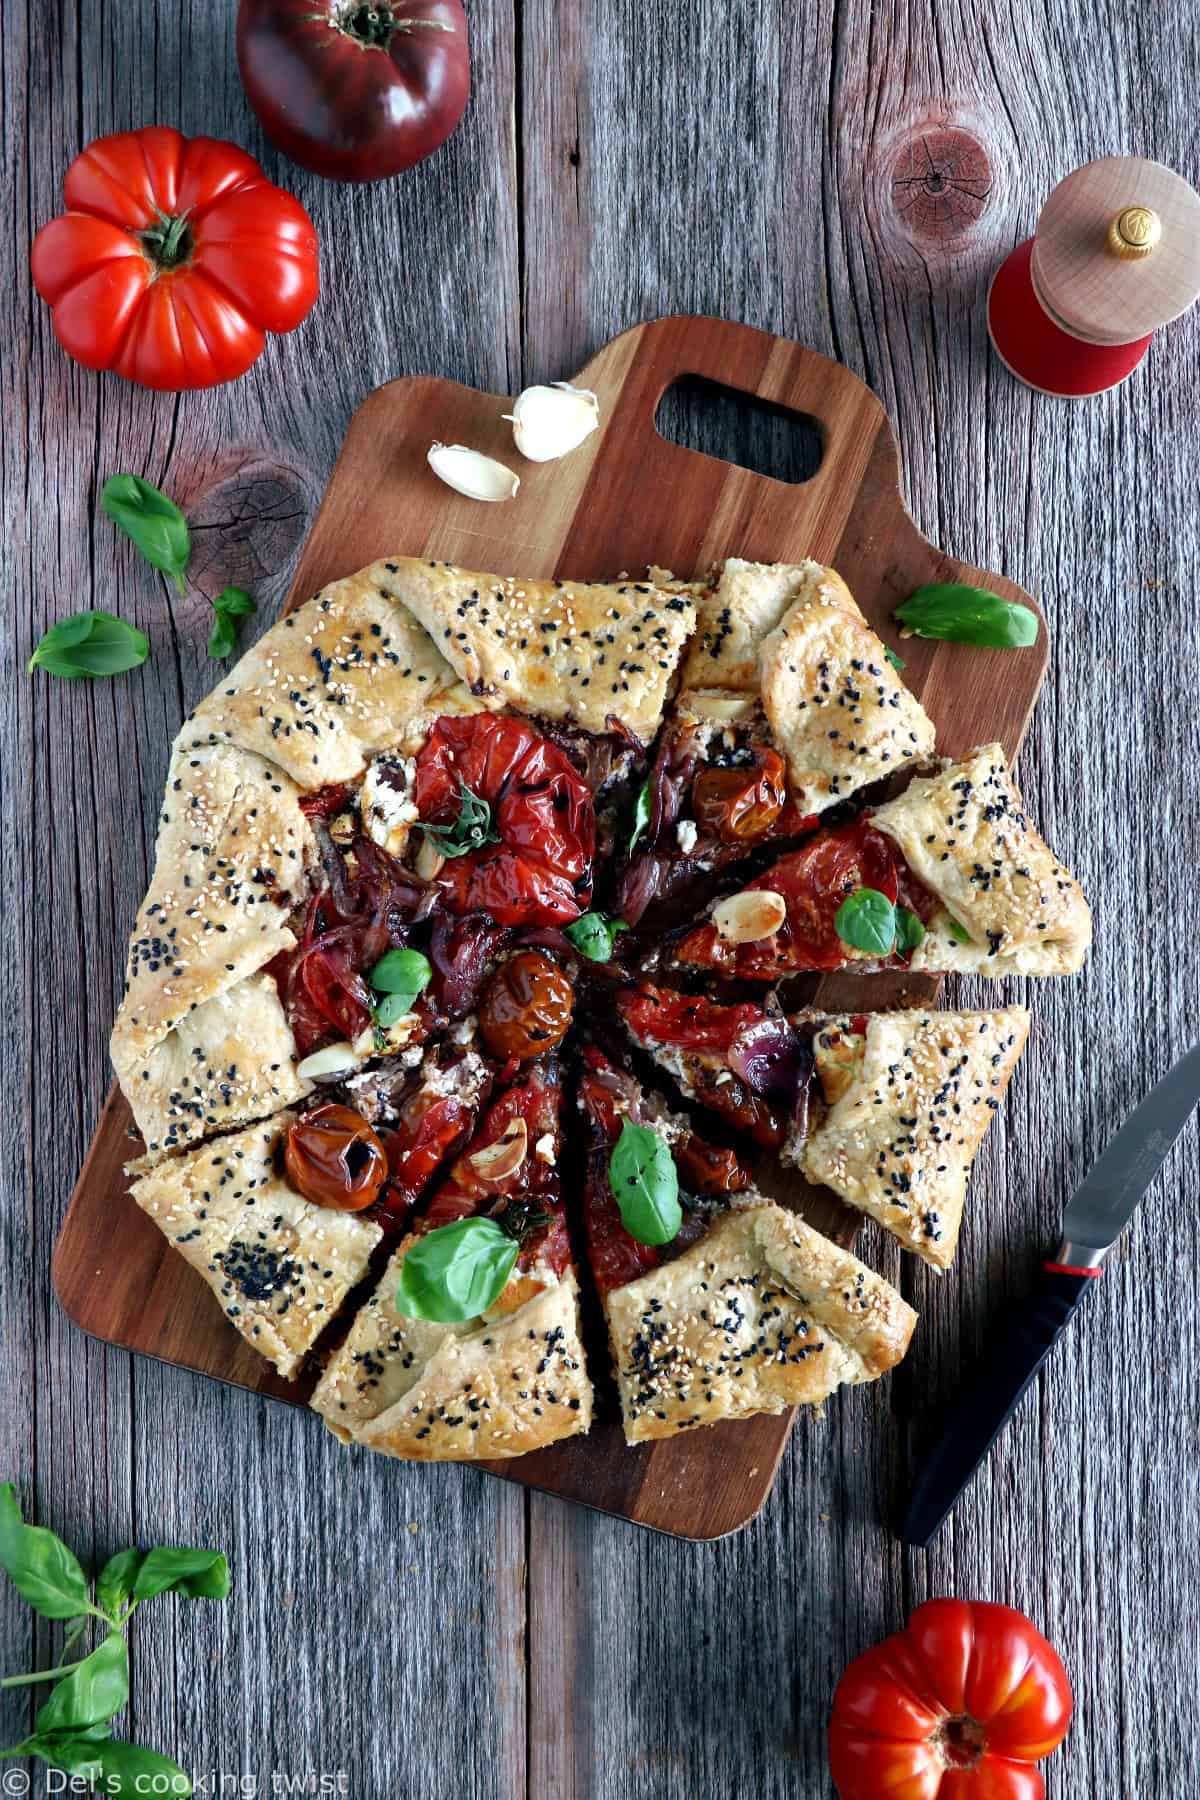 Balsamic Caramelized Onions and Goat Cheese Tomato Galette. This tomato galette is prepared with balsamic caramelized onions, heirloom tomatoes and fresh goat cheese, all tucked into a flaky pie crust. It makes a great end of summer light dinner, appetizer or brunch item.